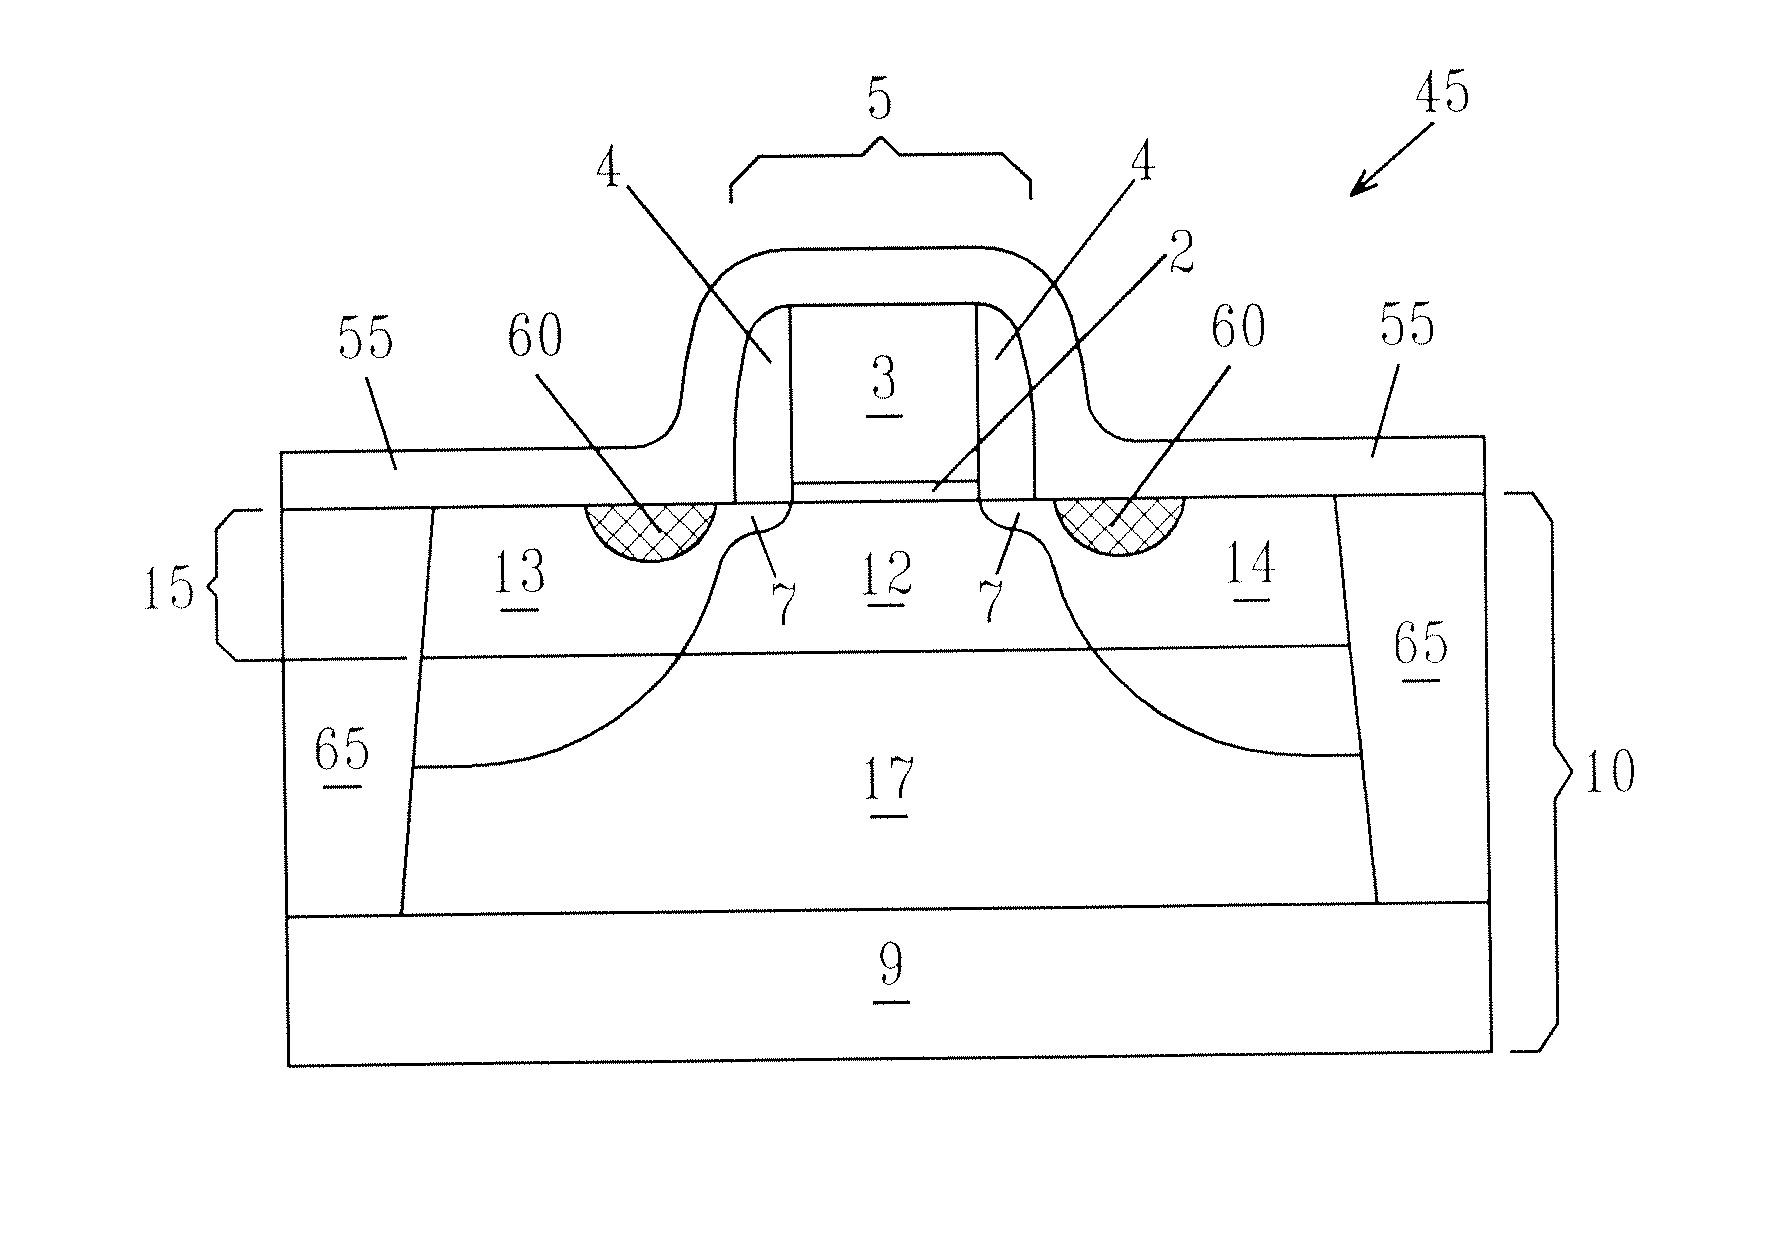 Strained-silicon CMOS device and method